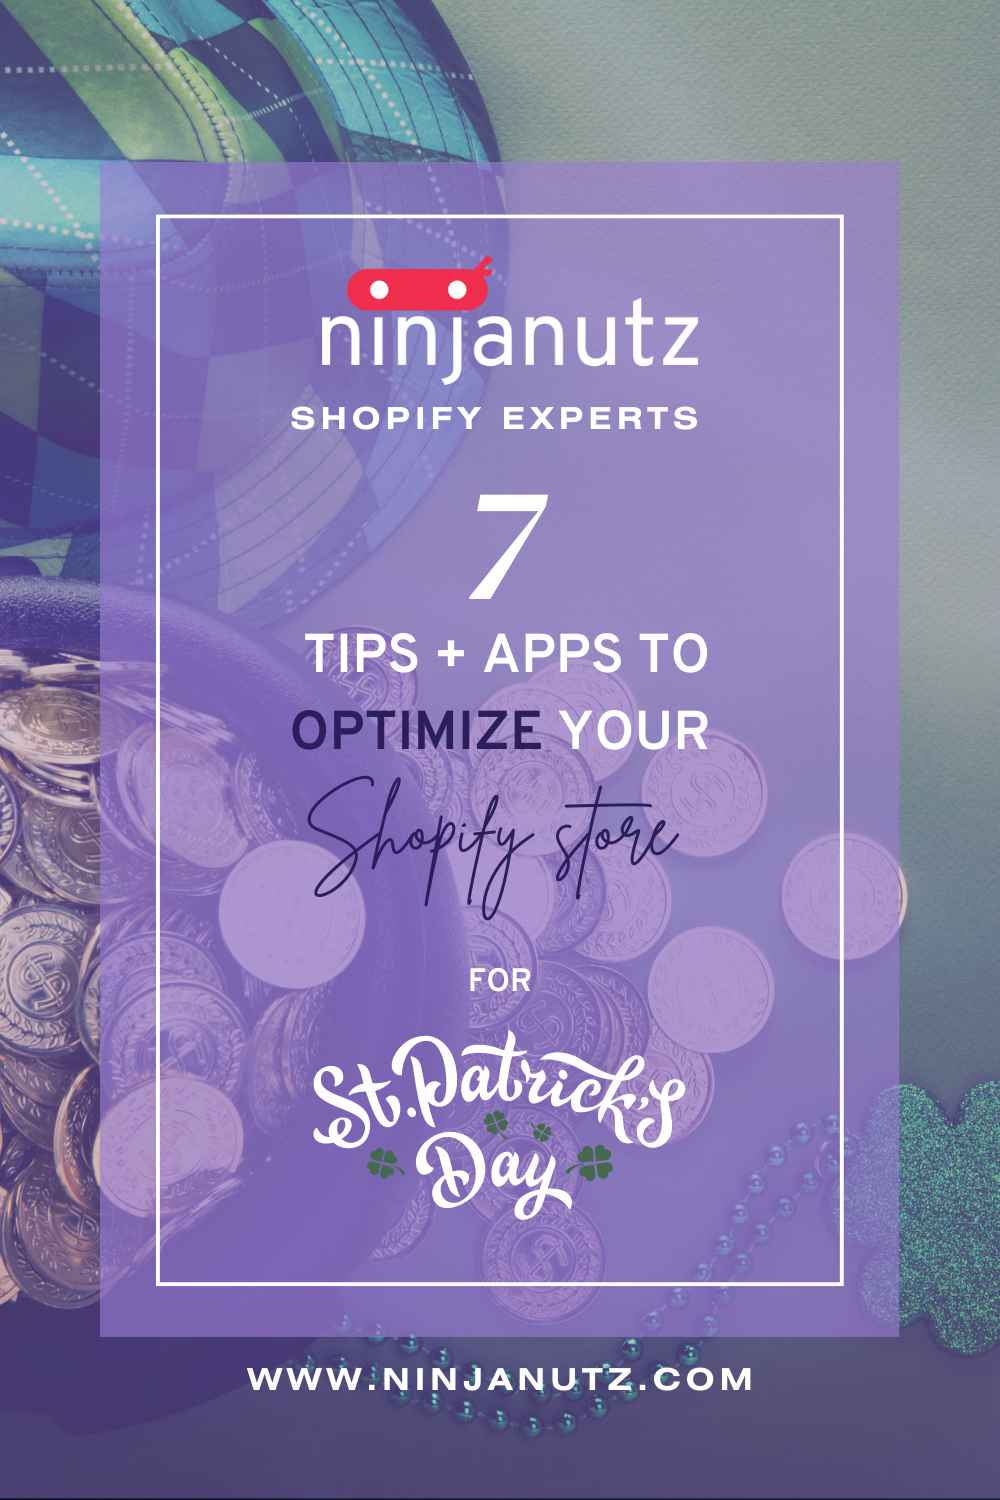 7 Tips + Apps to Optimize Your Shopify Store for St. Patrick's Day Sales NinjaNutz®